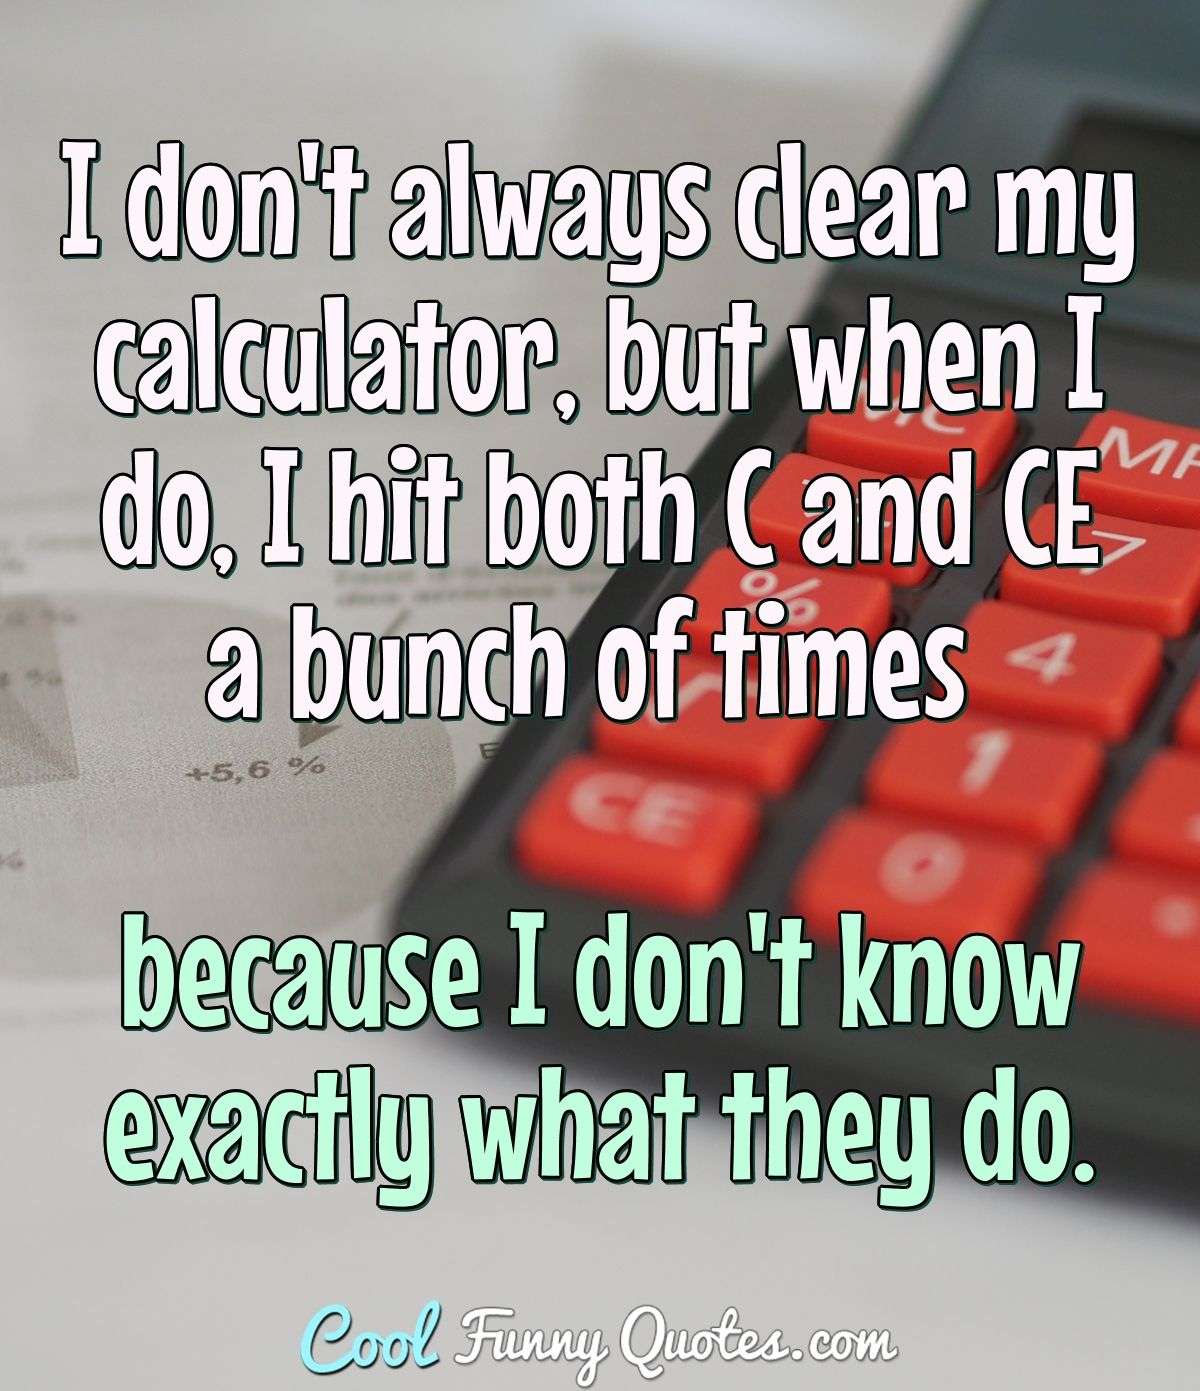 I don't always clear my calculator, but when I do, I hit both C and CE a bunch of times because I don't know exactly what they do. - Anonymous